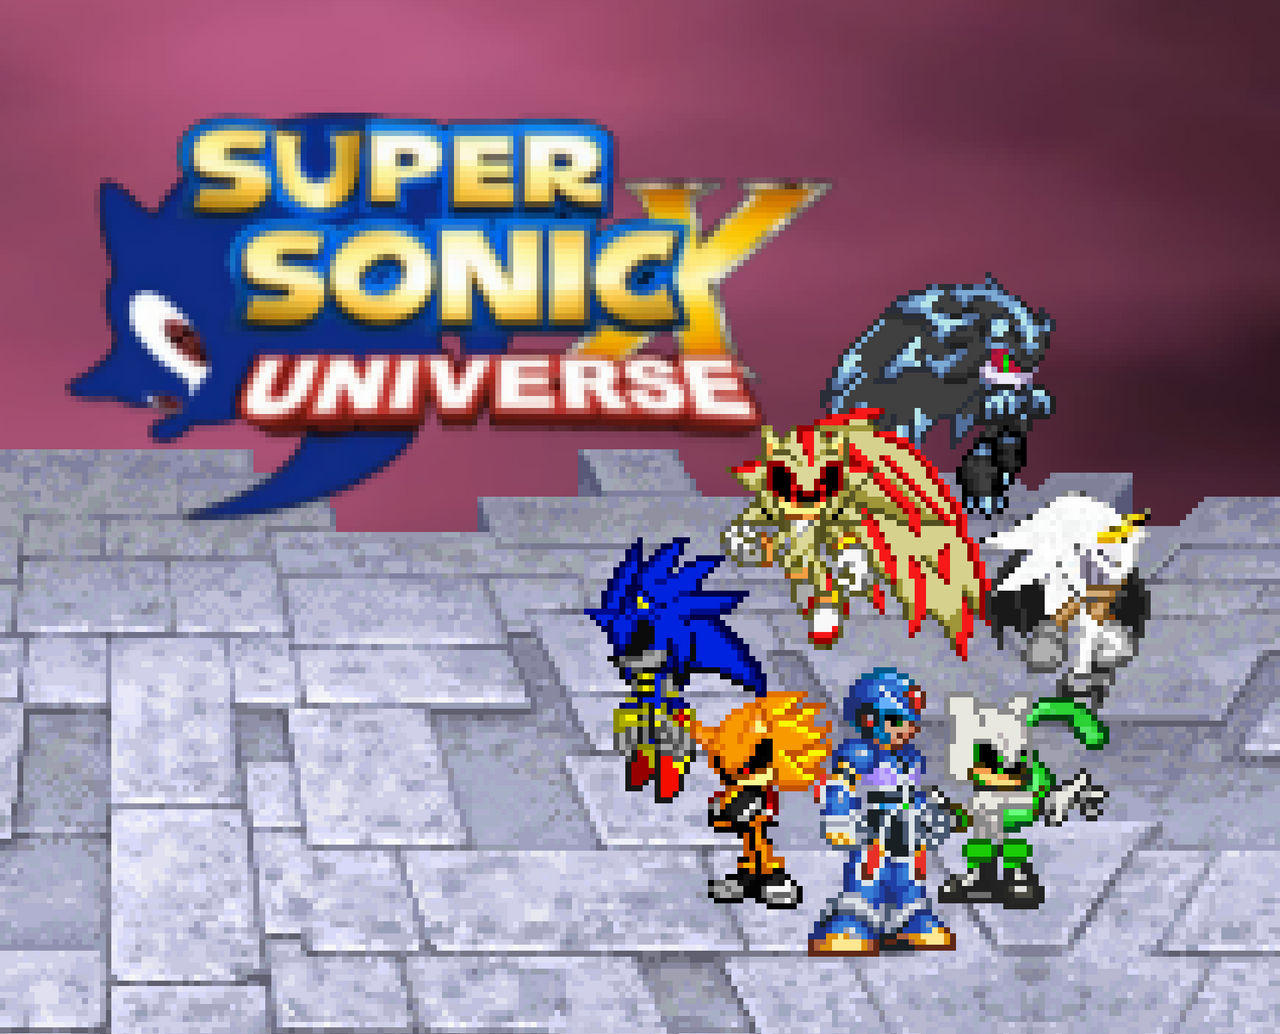 Super Sonic X Universe (Season 2) sprite poster by Hed124 on DeviantArt